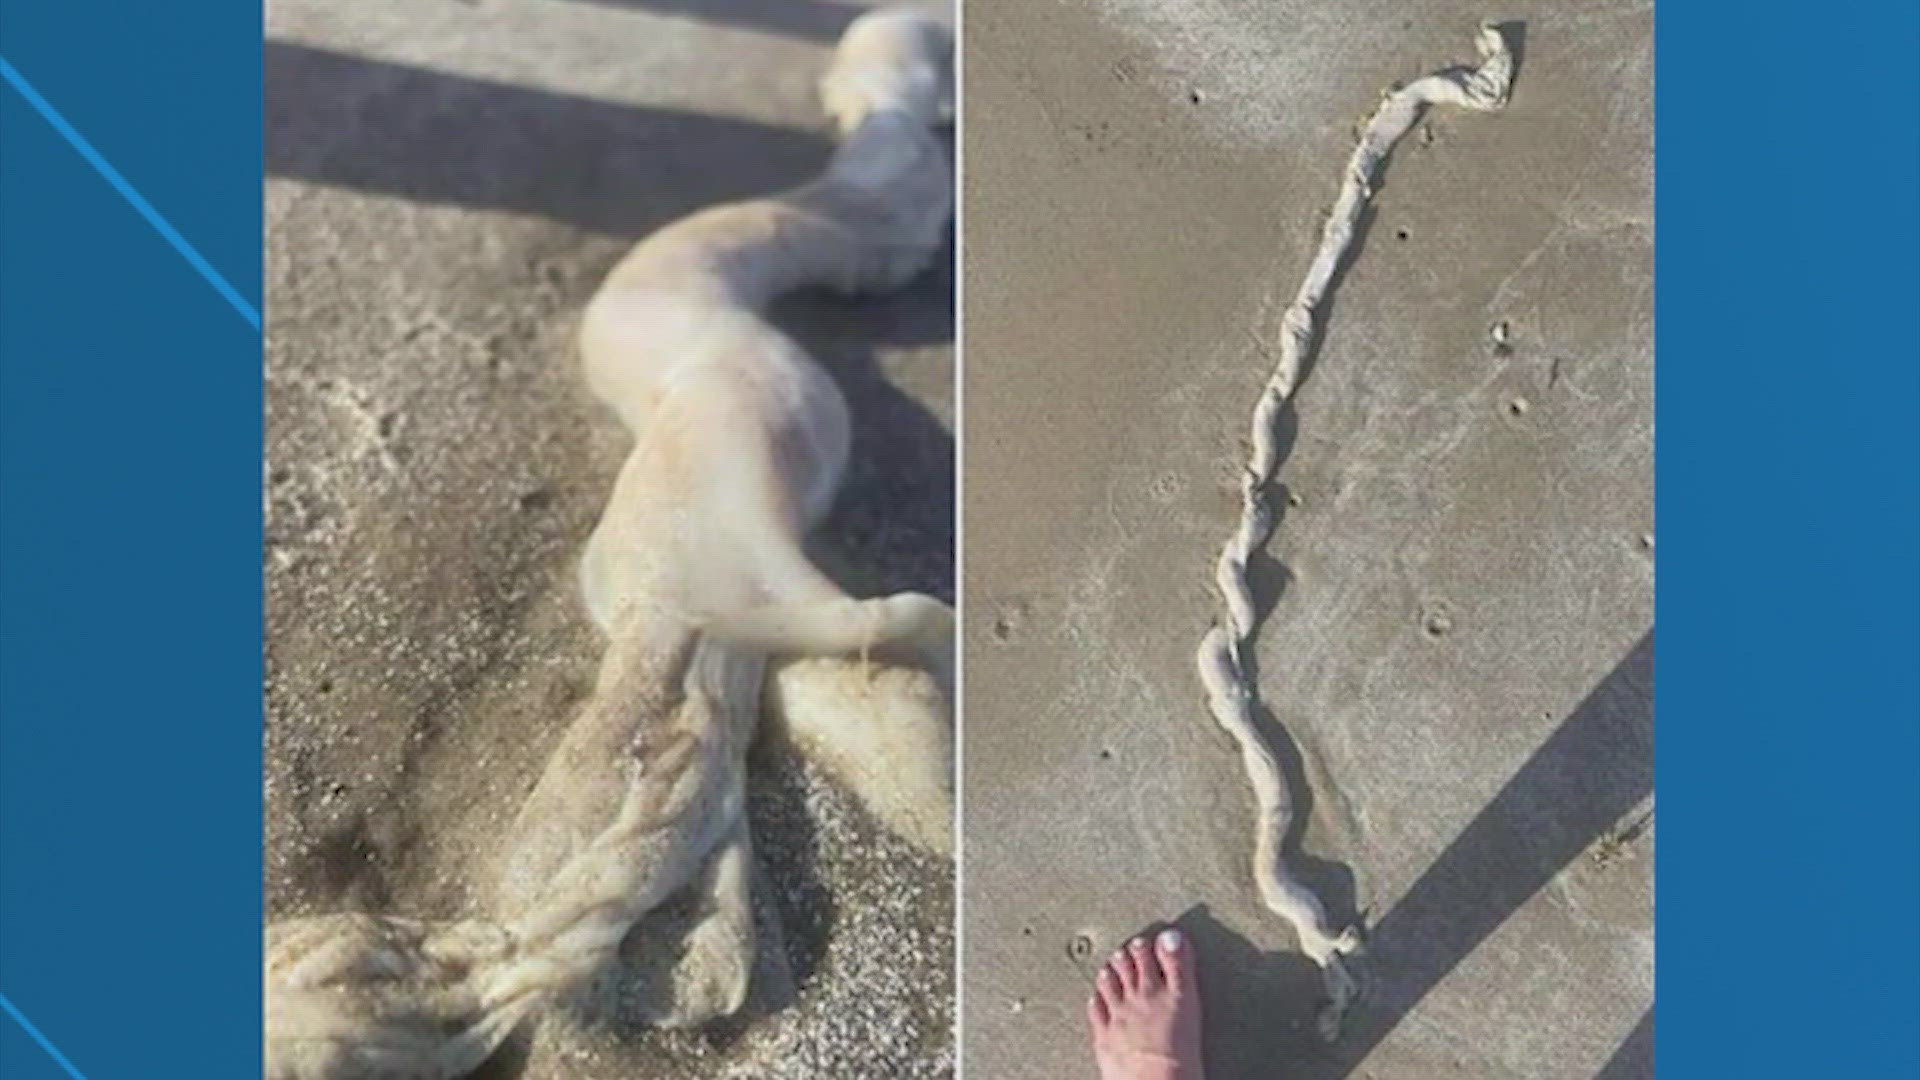 Julie Prejean snapped photos of the weird, white wormy thing she spotted on Crystal Beach last week. She shared them on Bolivar Beachcombers Facebook page to ask for